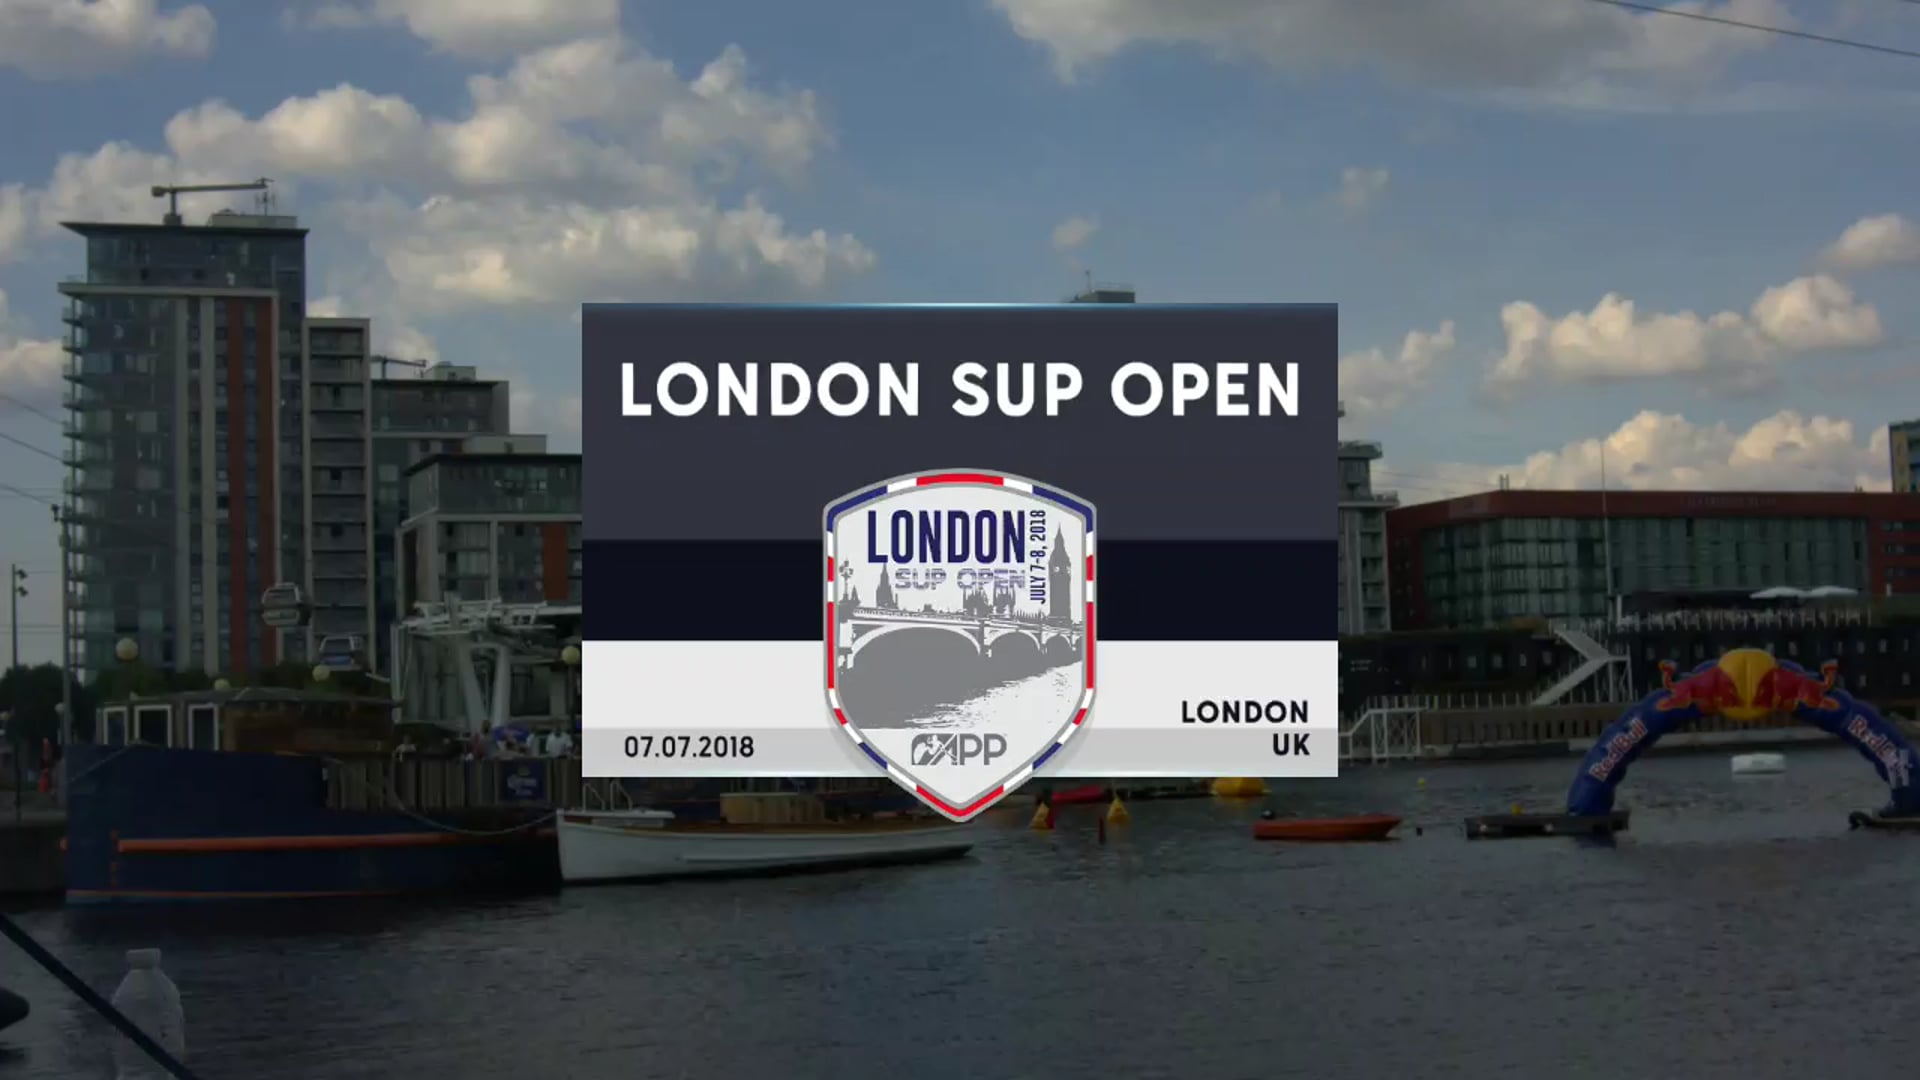 London Sup Open 2018 Mens and Women's Sprint Races - Live Recodring